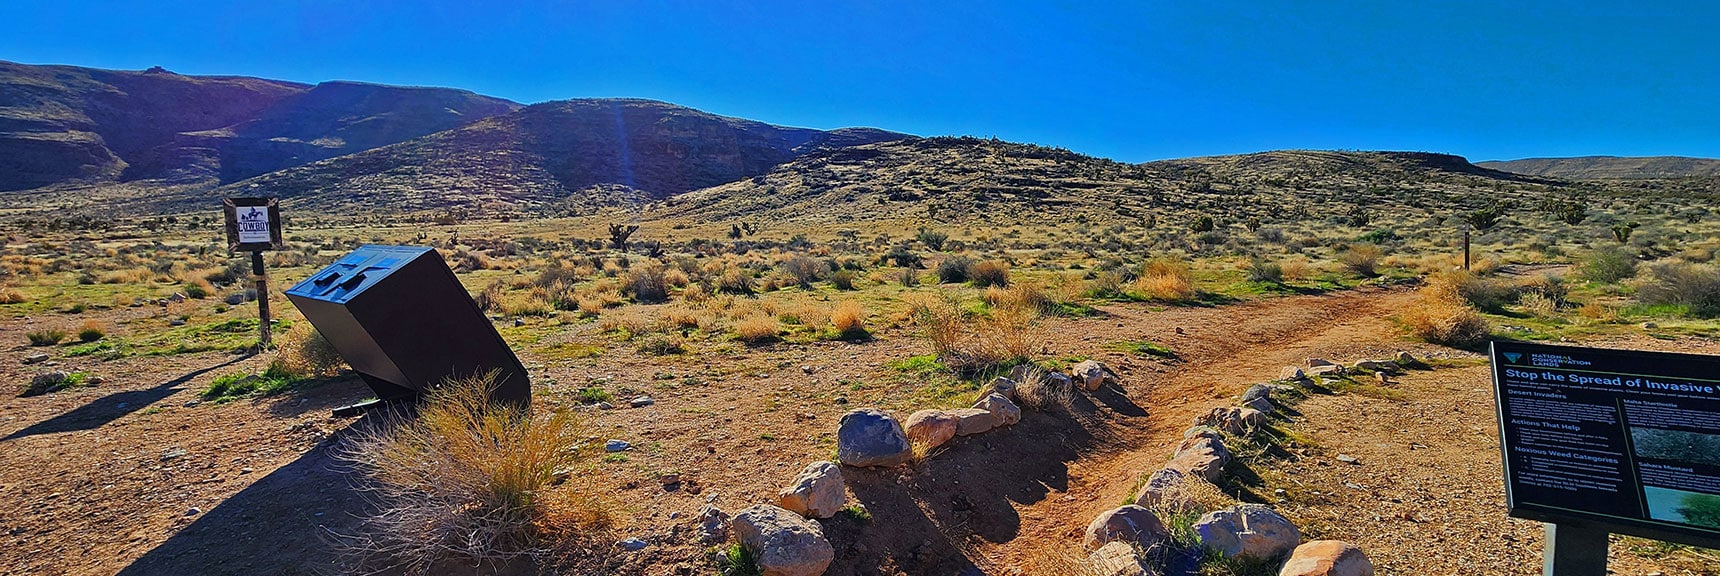 Take the Middle Trail On the Right and Aim for Fossil Ridge Ahead. | Fossil Canyon | Cowboy Canyon | Blue Diamond Hill, Nevada